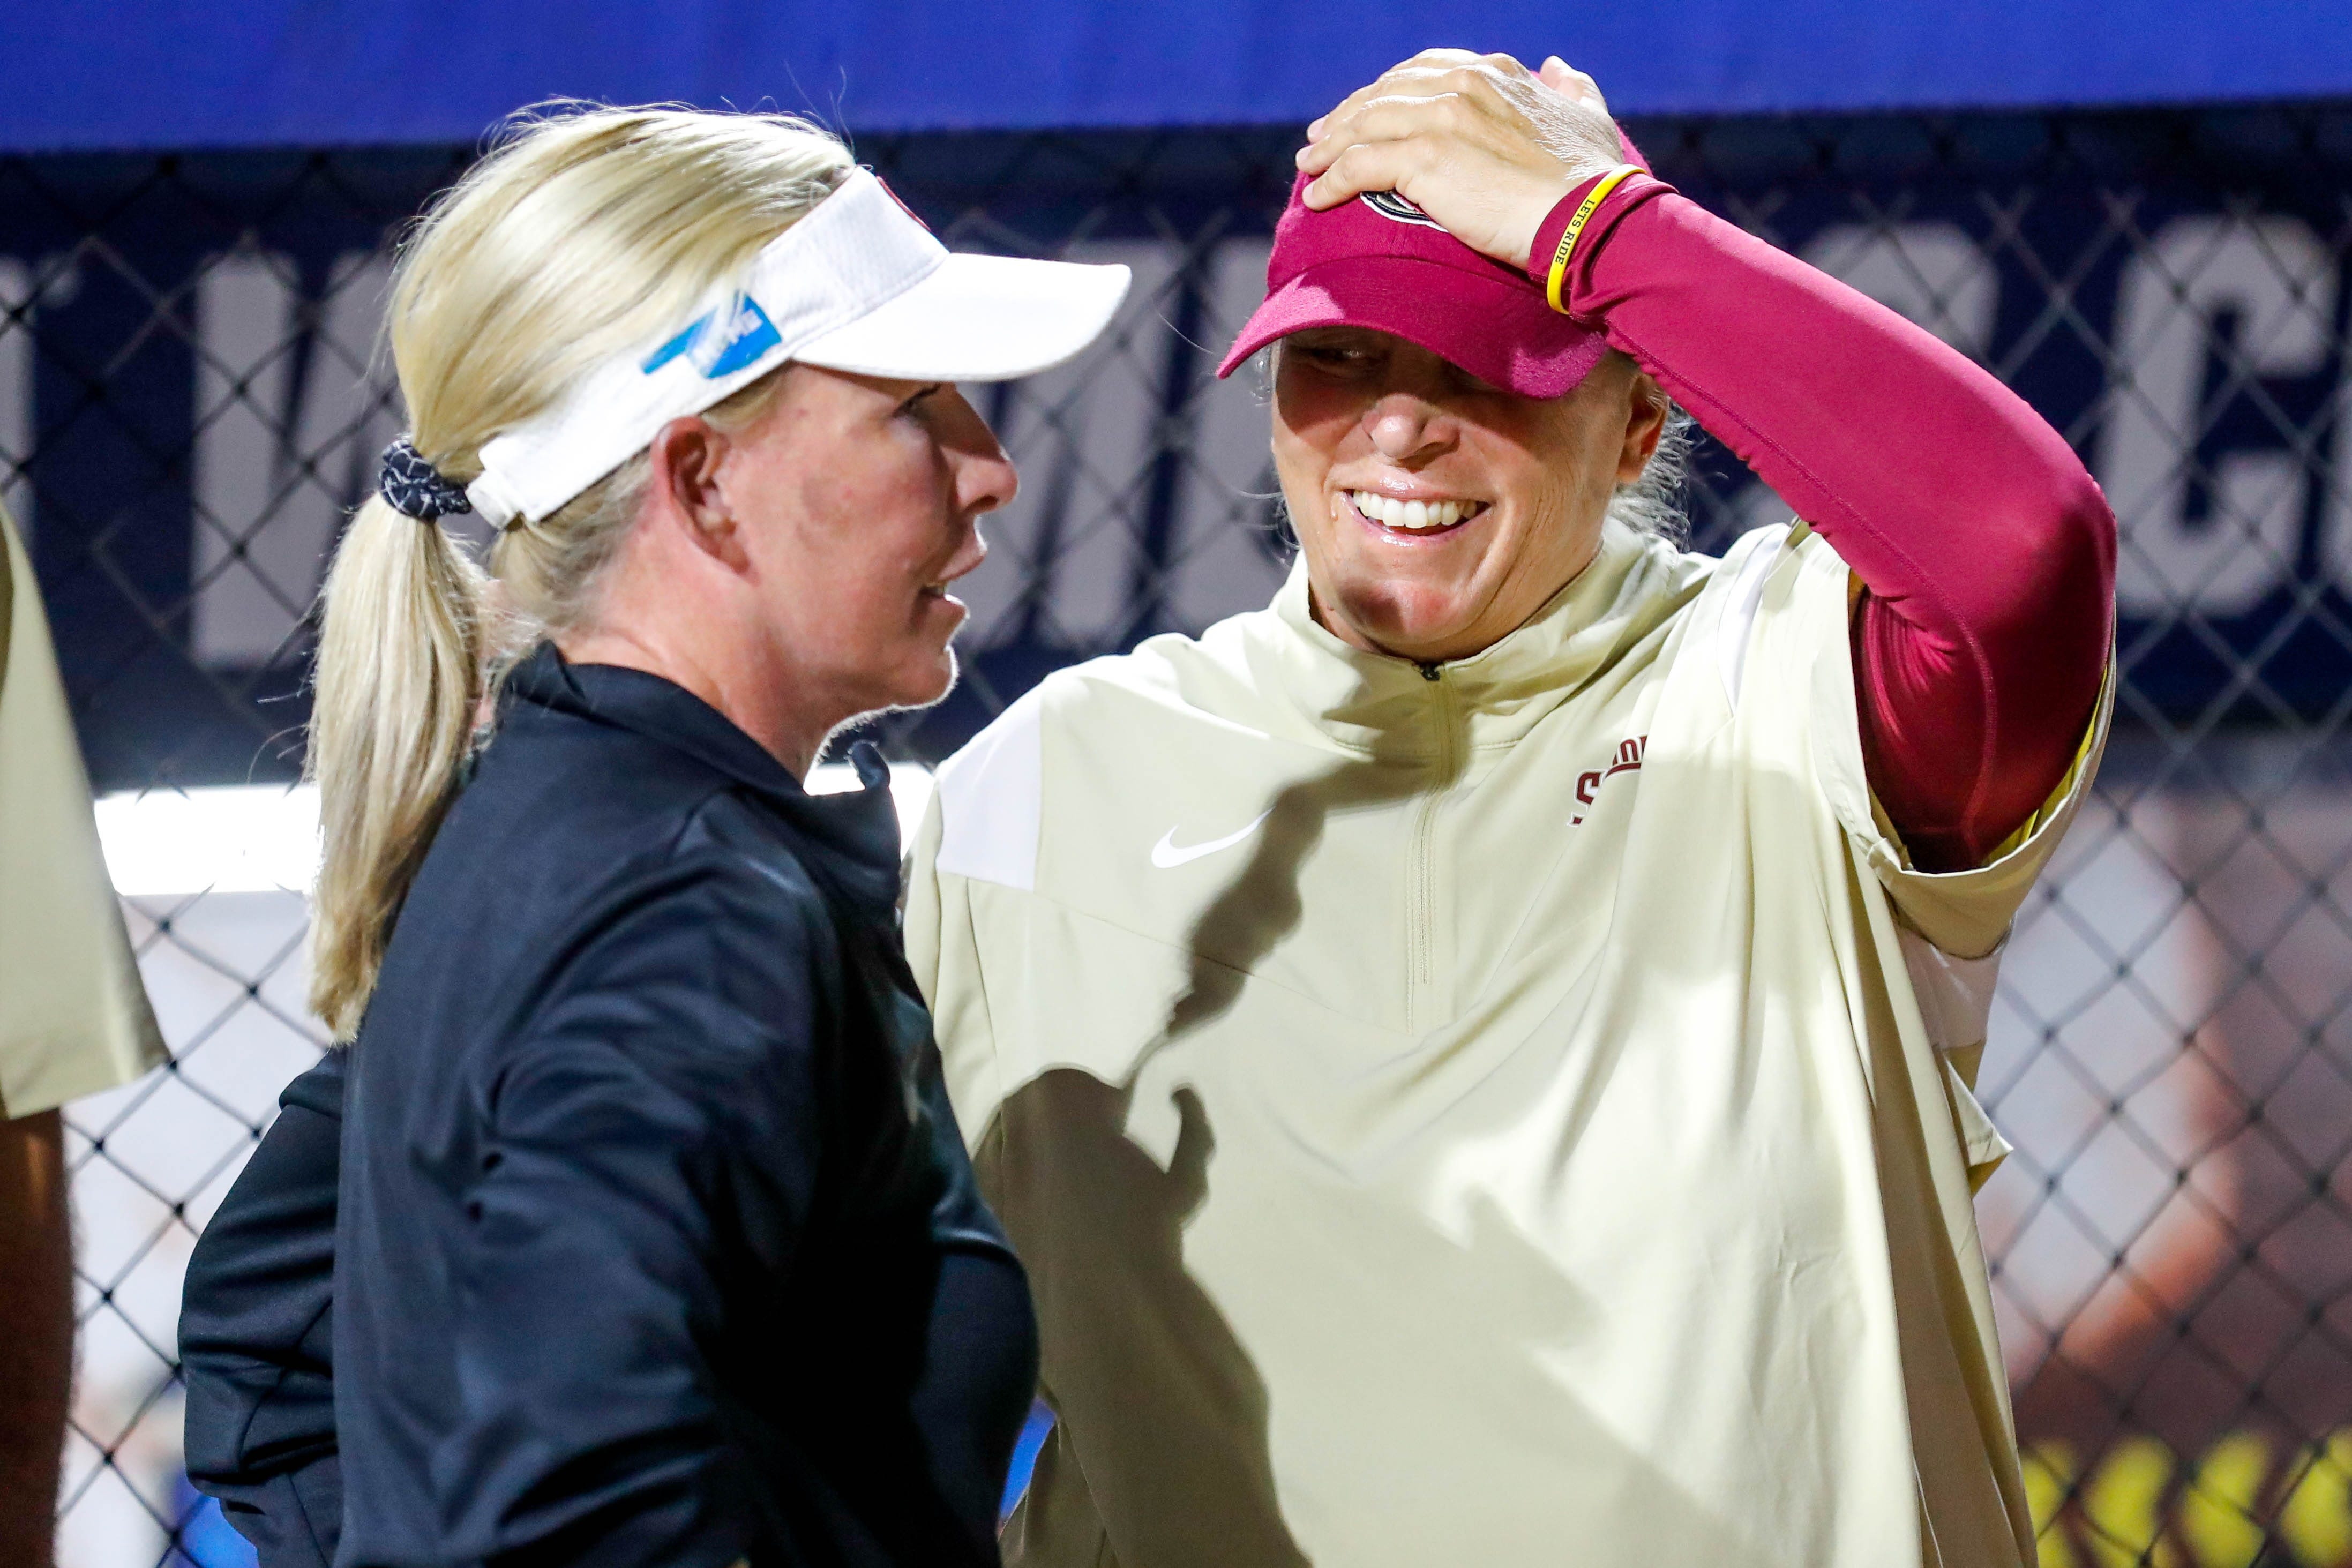 FSU softball heads to Norman to face Oklahoma in Women's College World Series rematch